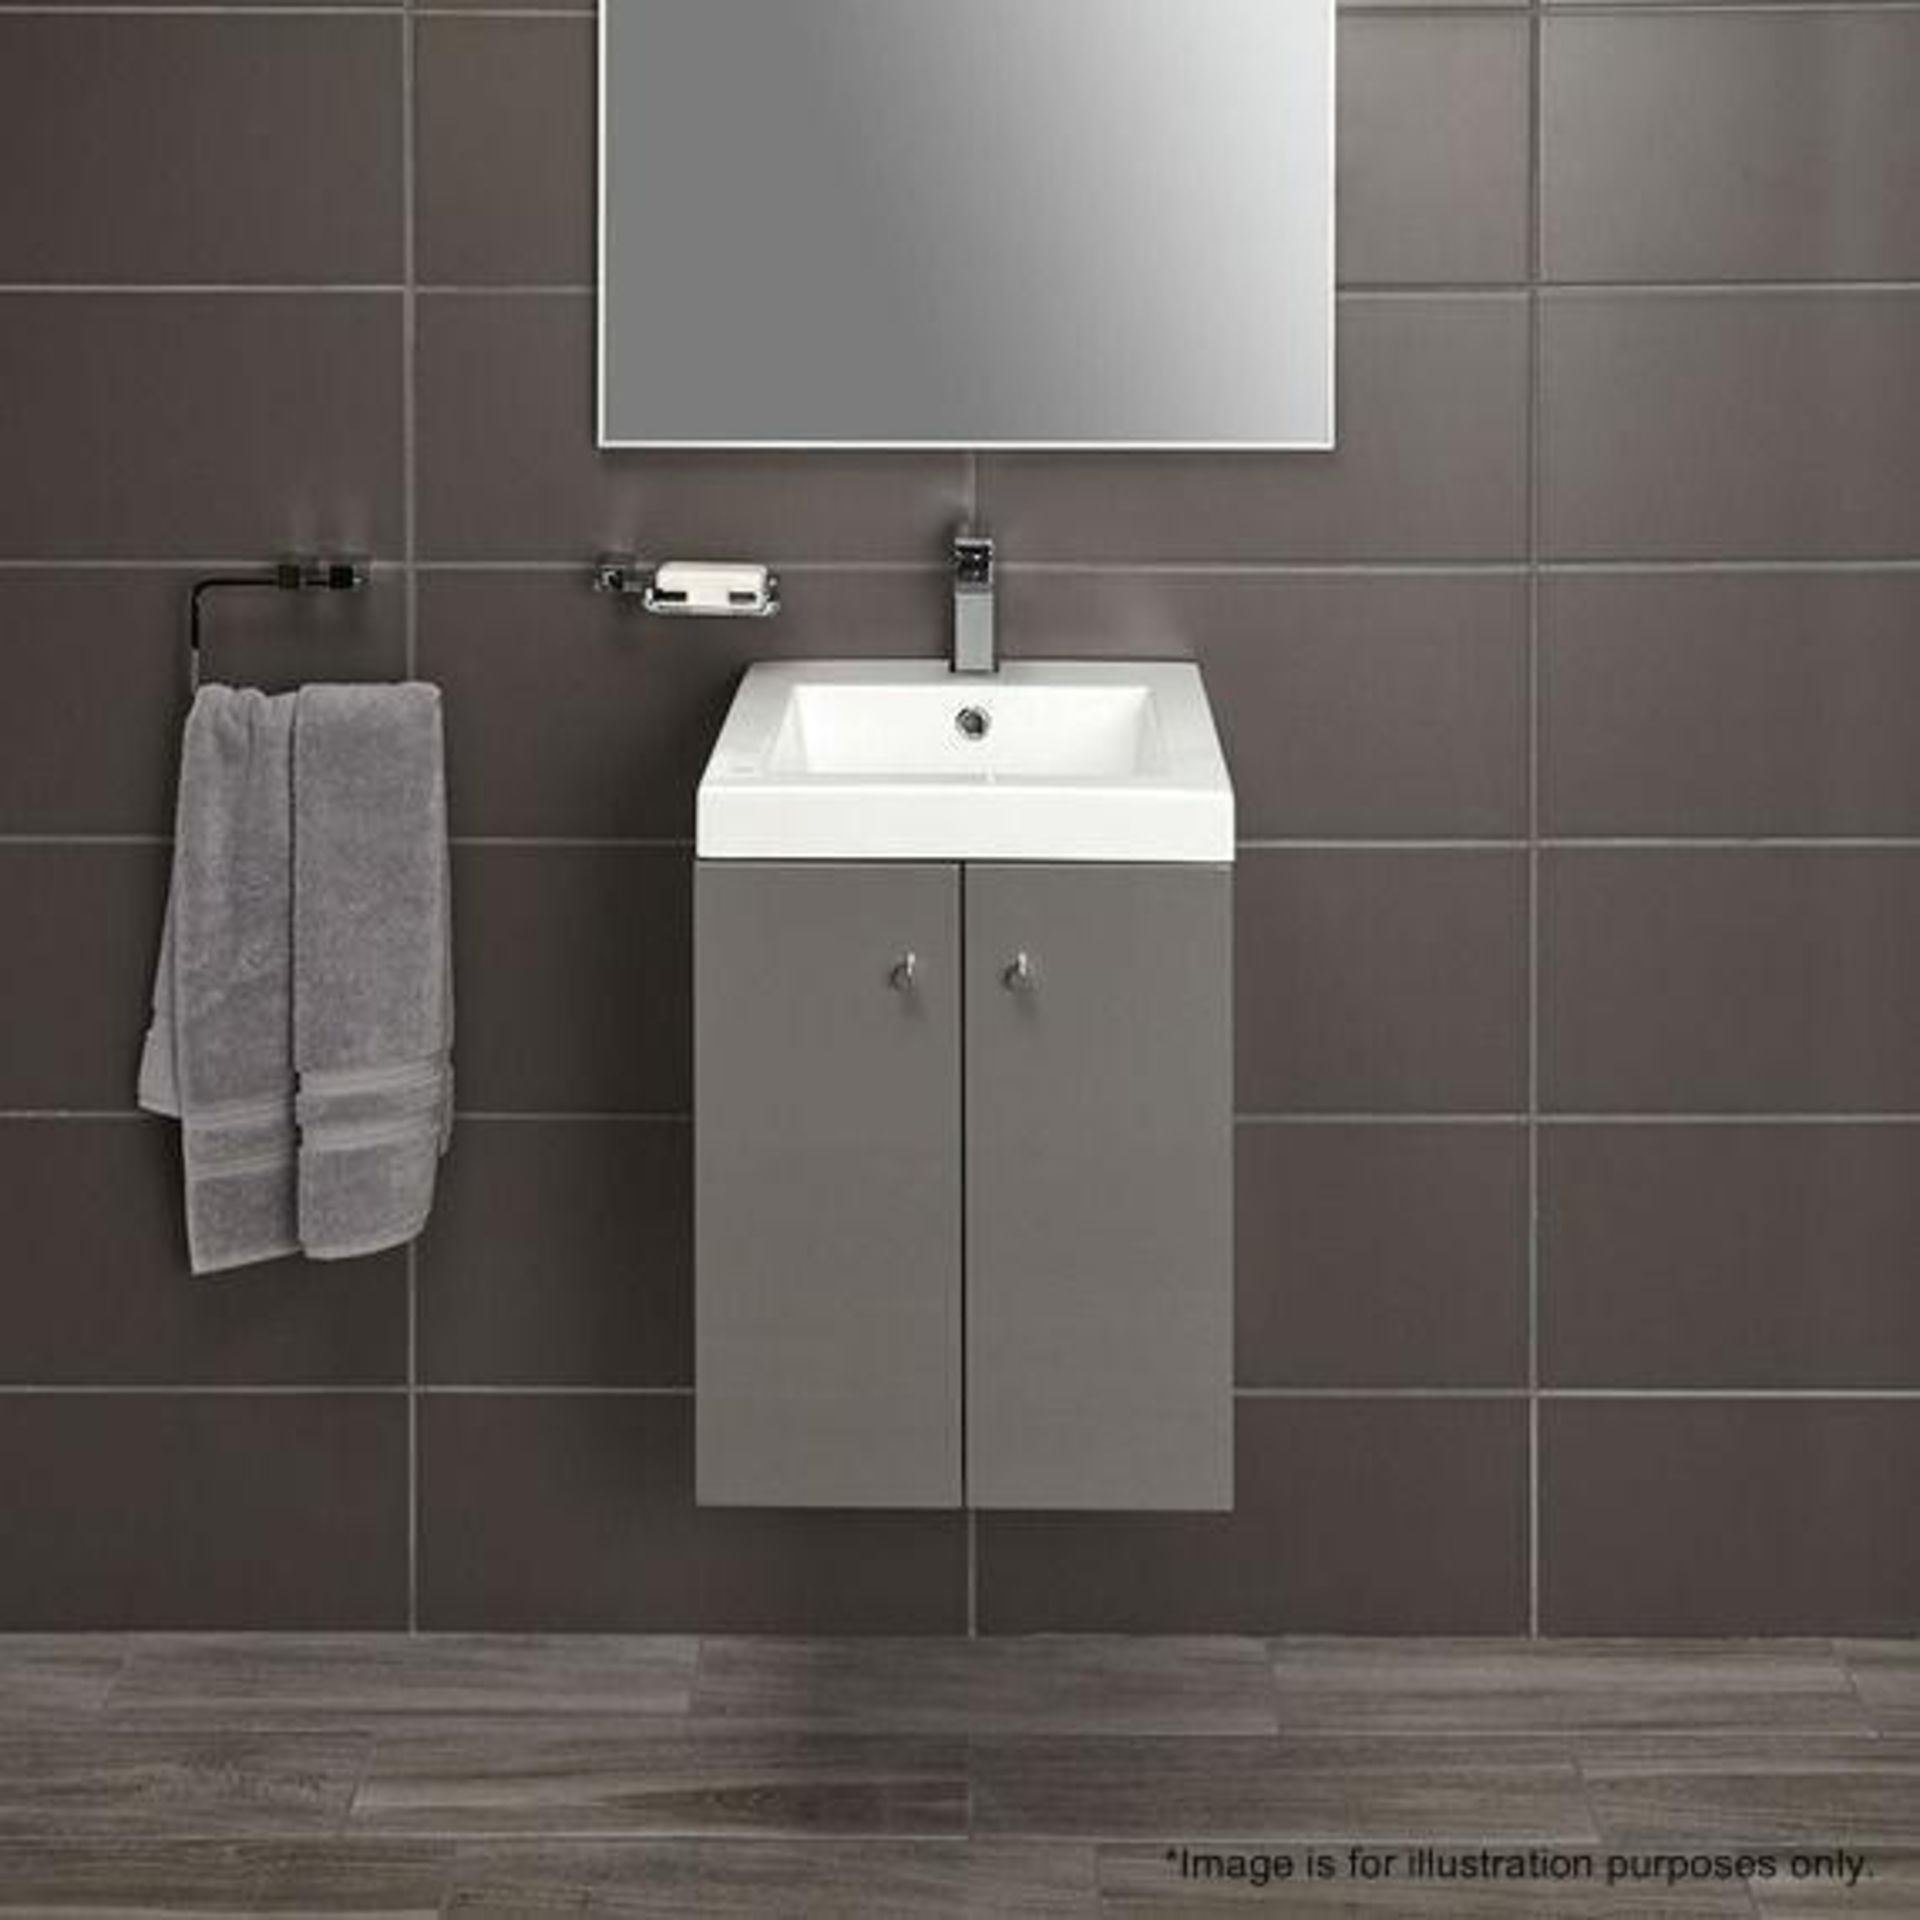 5 x Alpine Duo 400 Wall Hung Vanity Units In Gloss Grey - Brand New Boxed Stock - Dimensions: H49 x - Image 2 of 5